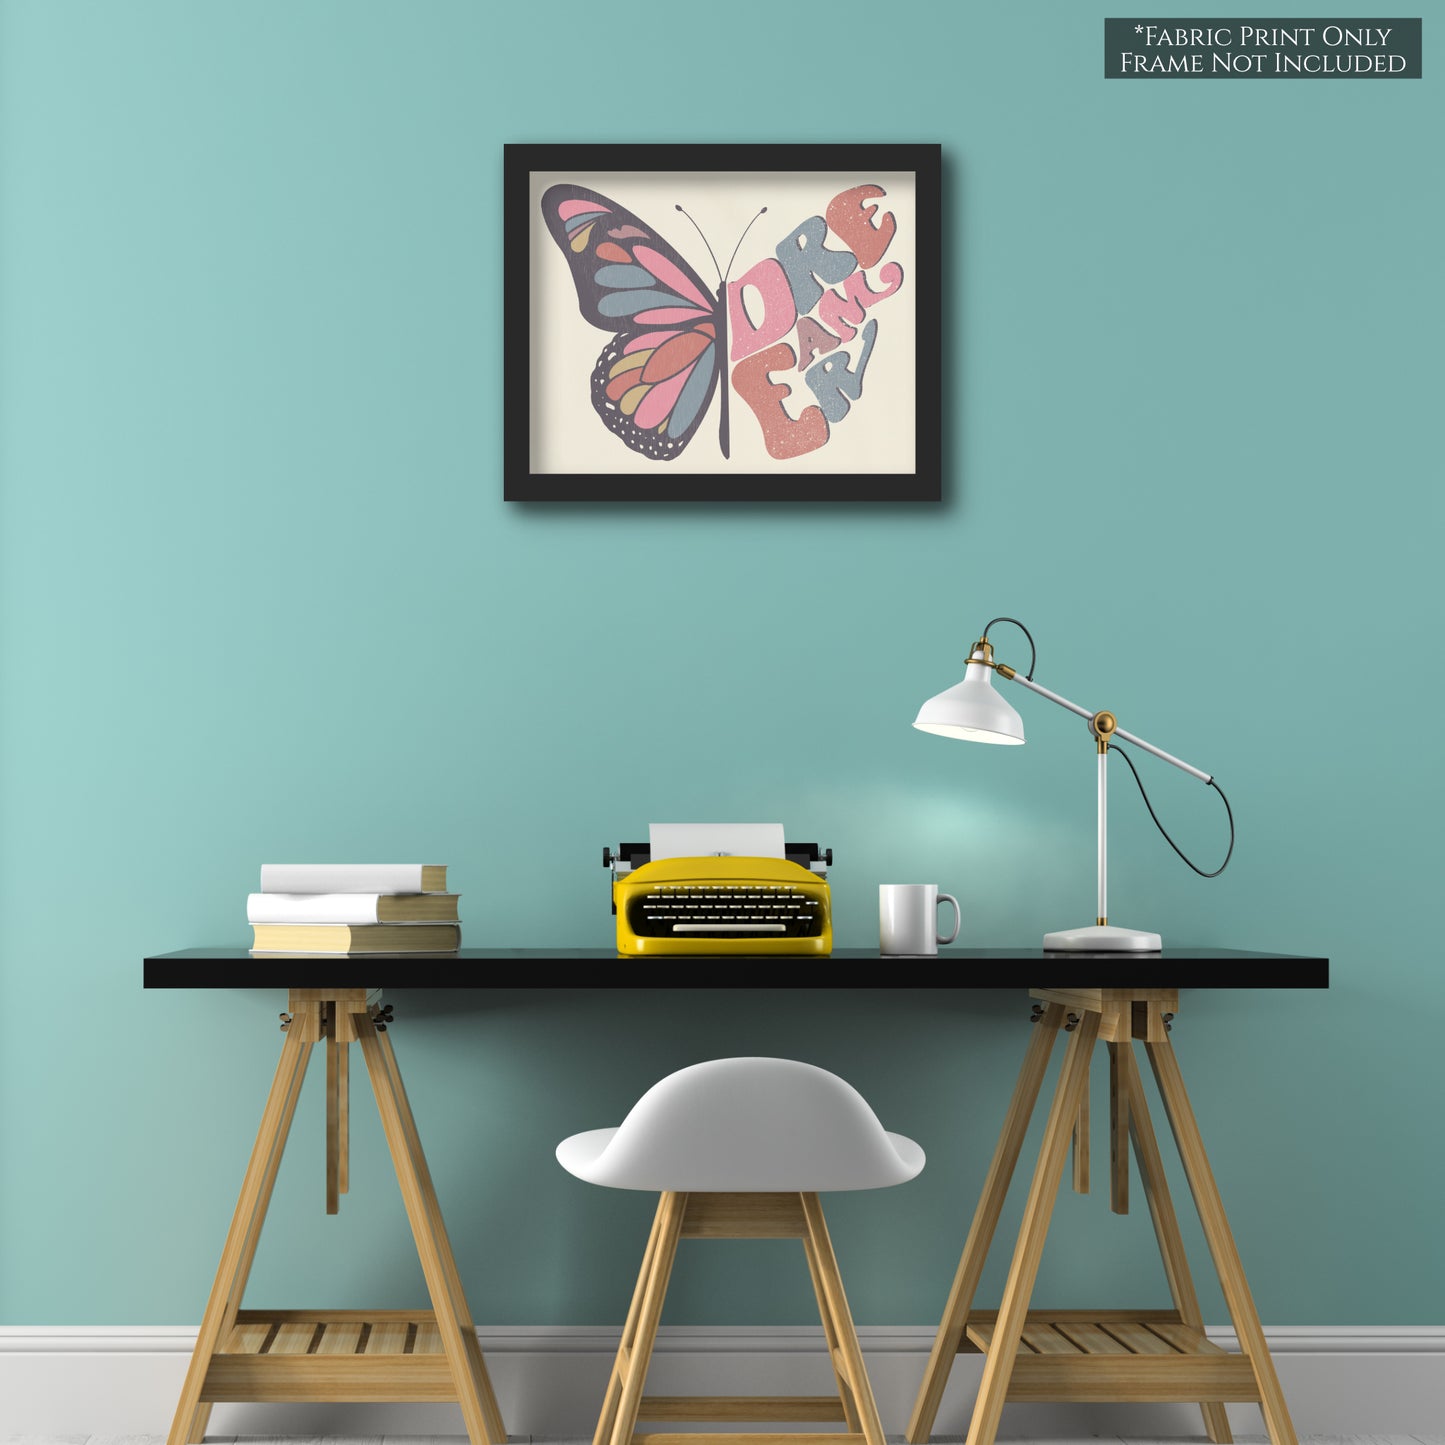 Quotes About Life, Butterfly Dreamer, Quilting Fabric - Wall Art